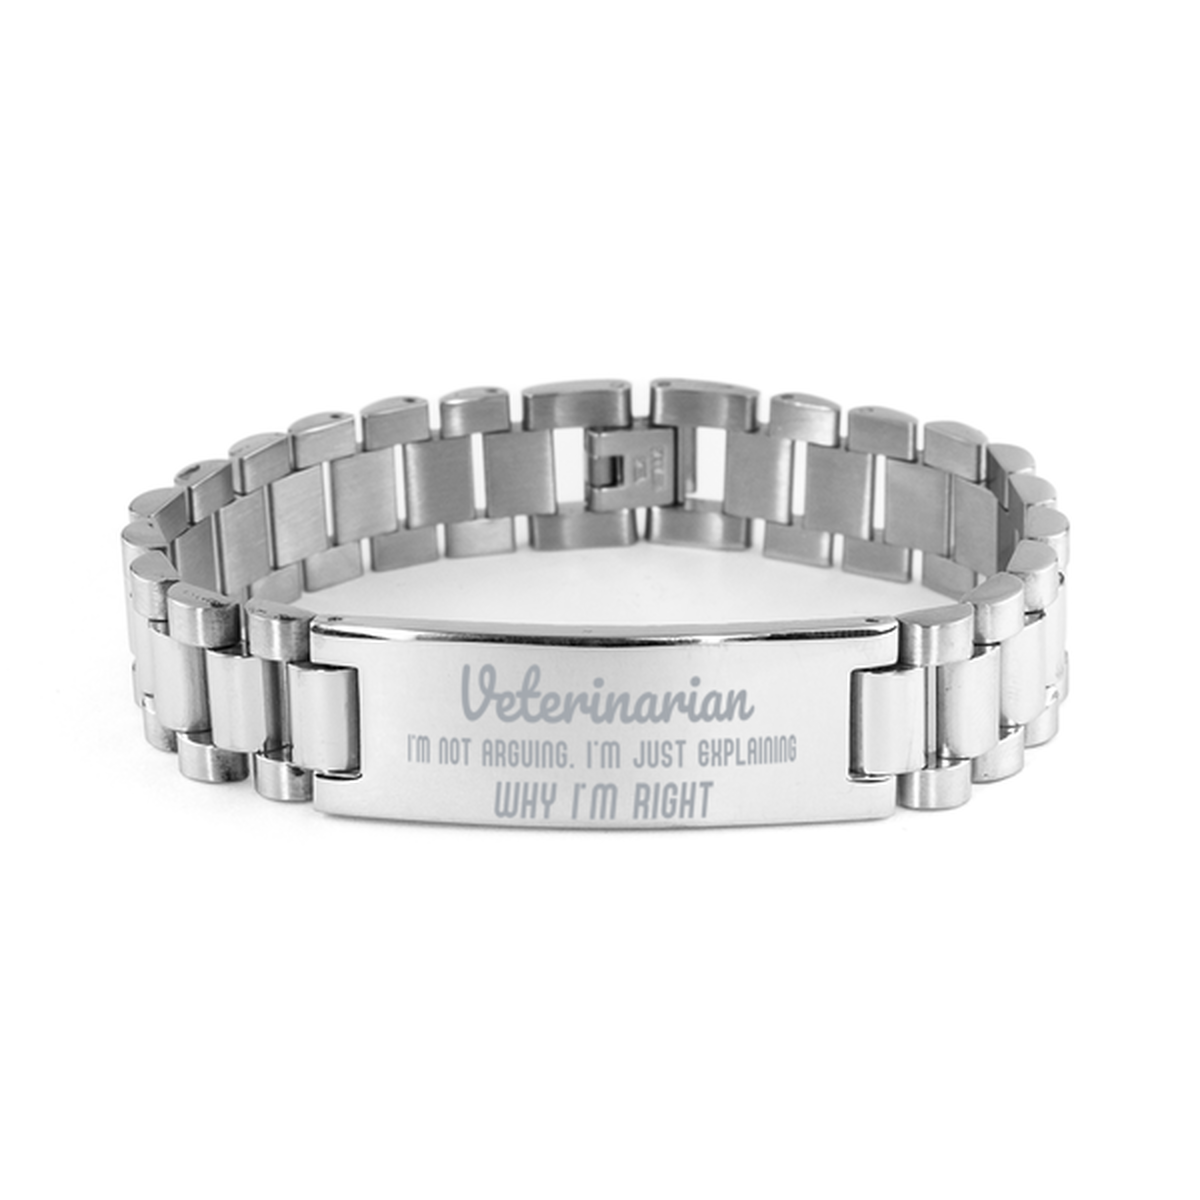 Veterinarian I'm not Arguing. I'm Just Explaining Why I'm RIGHT Ladder Stainless Steel Bracelet, Graduation Birthday Christmas Veterinarian Gifts For Veterinarian Funny Saying Quote Present for Men Women Coworker